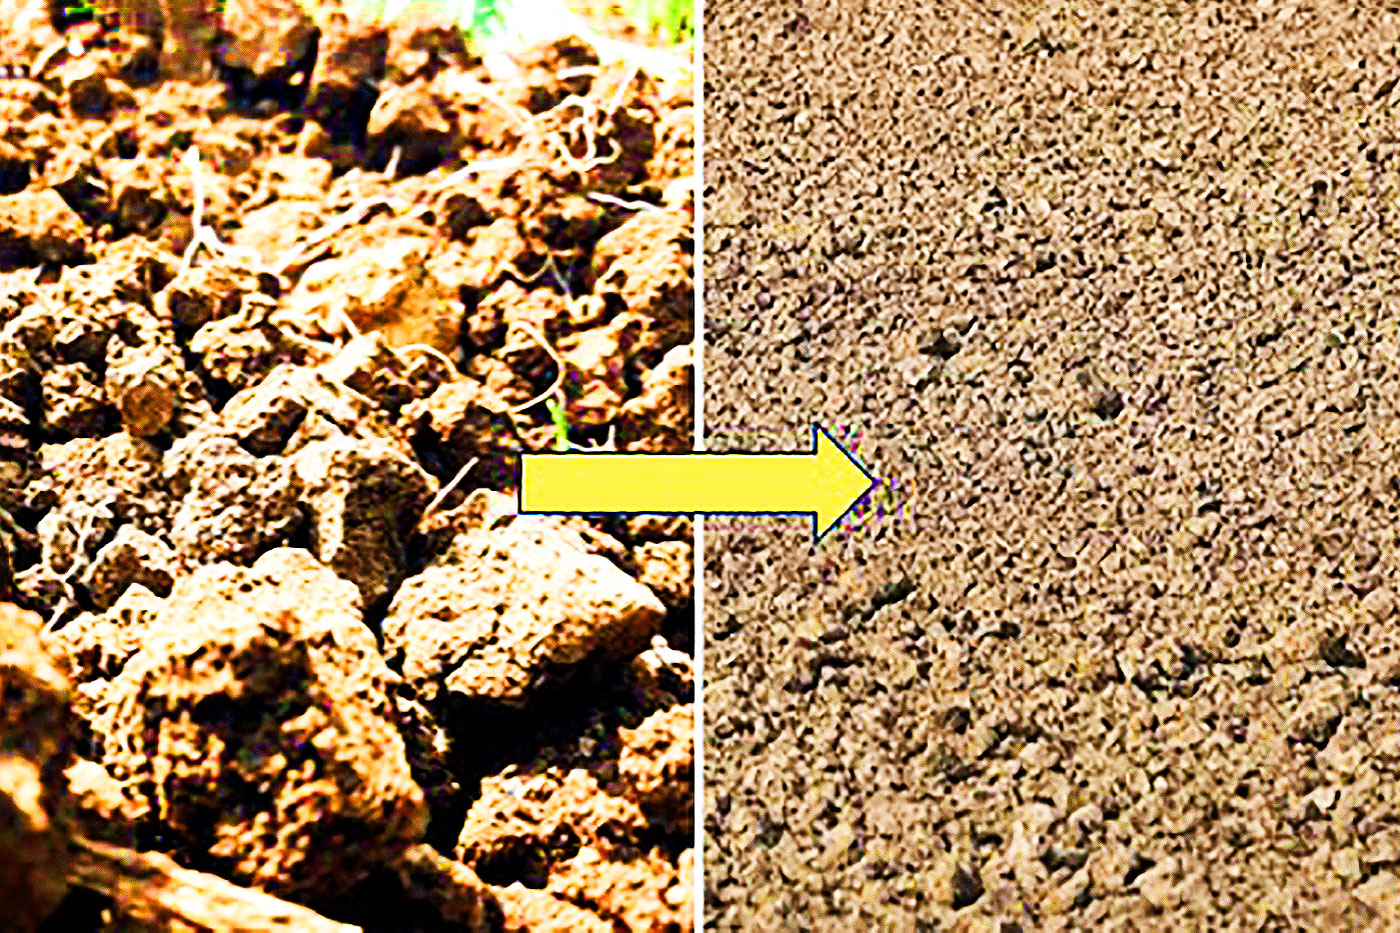 side by side of coarse soil on left and fine soil on right